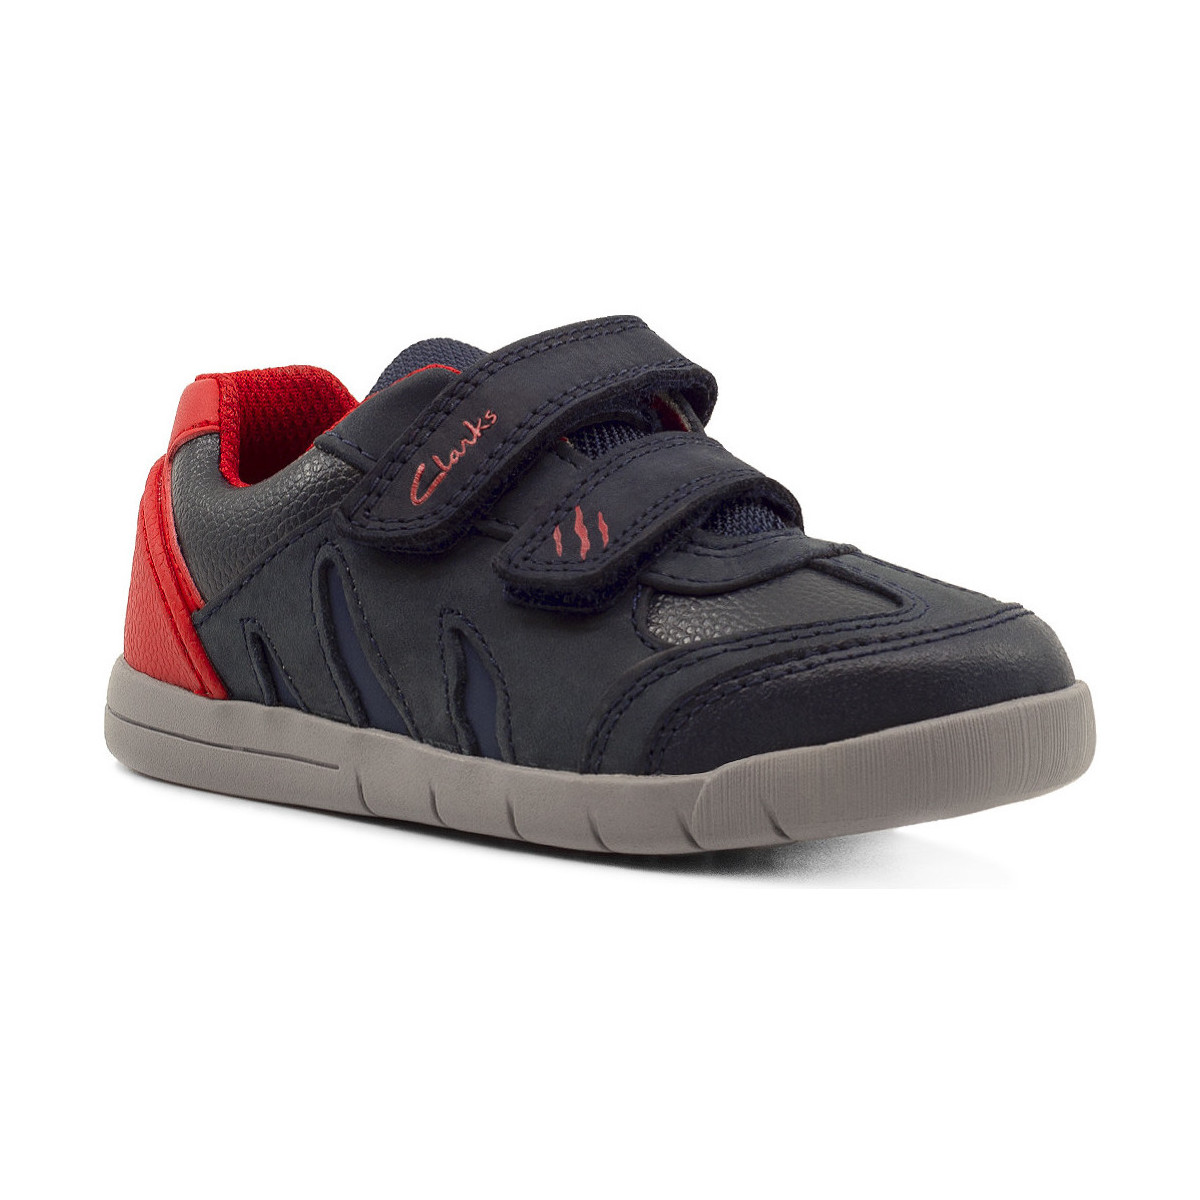 Sneakers Clarks Rex Play Toddlers Παιδικά Ανατομικά Δερμάτινα Sneaker